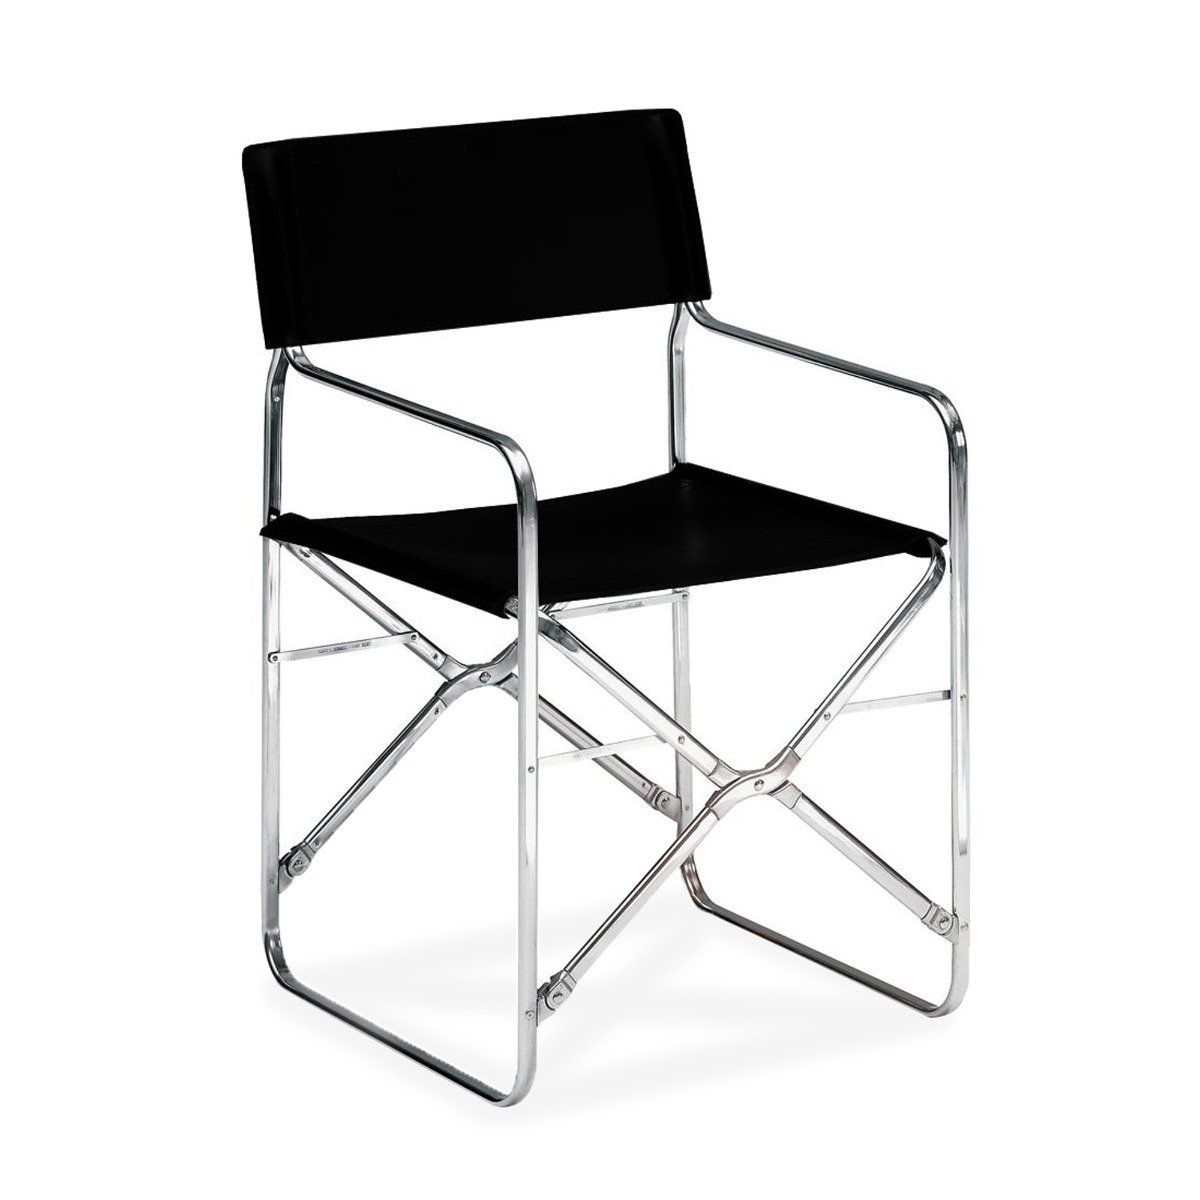 April Folding Outdoor Chair in Black By Zanotta